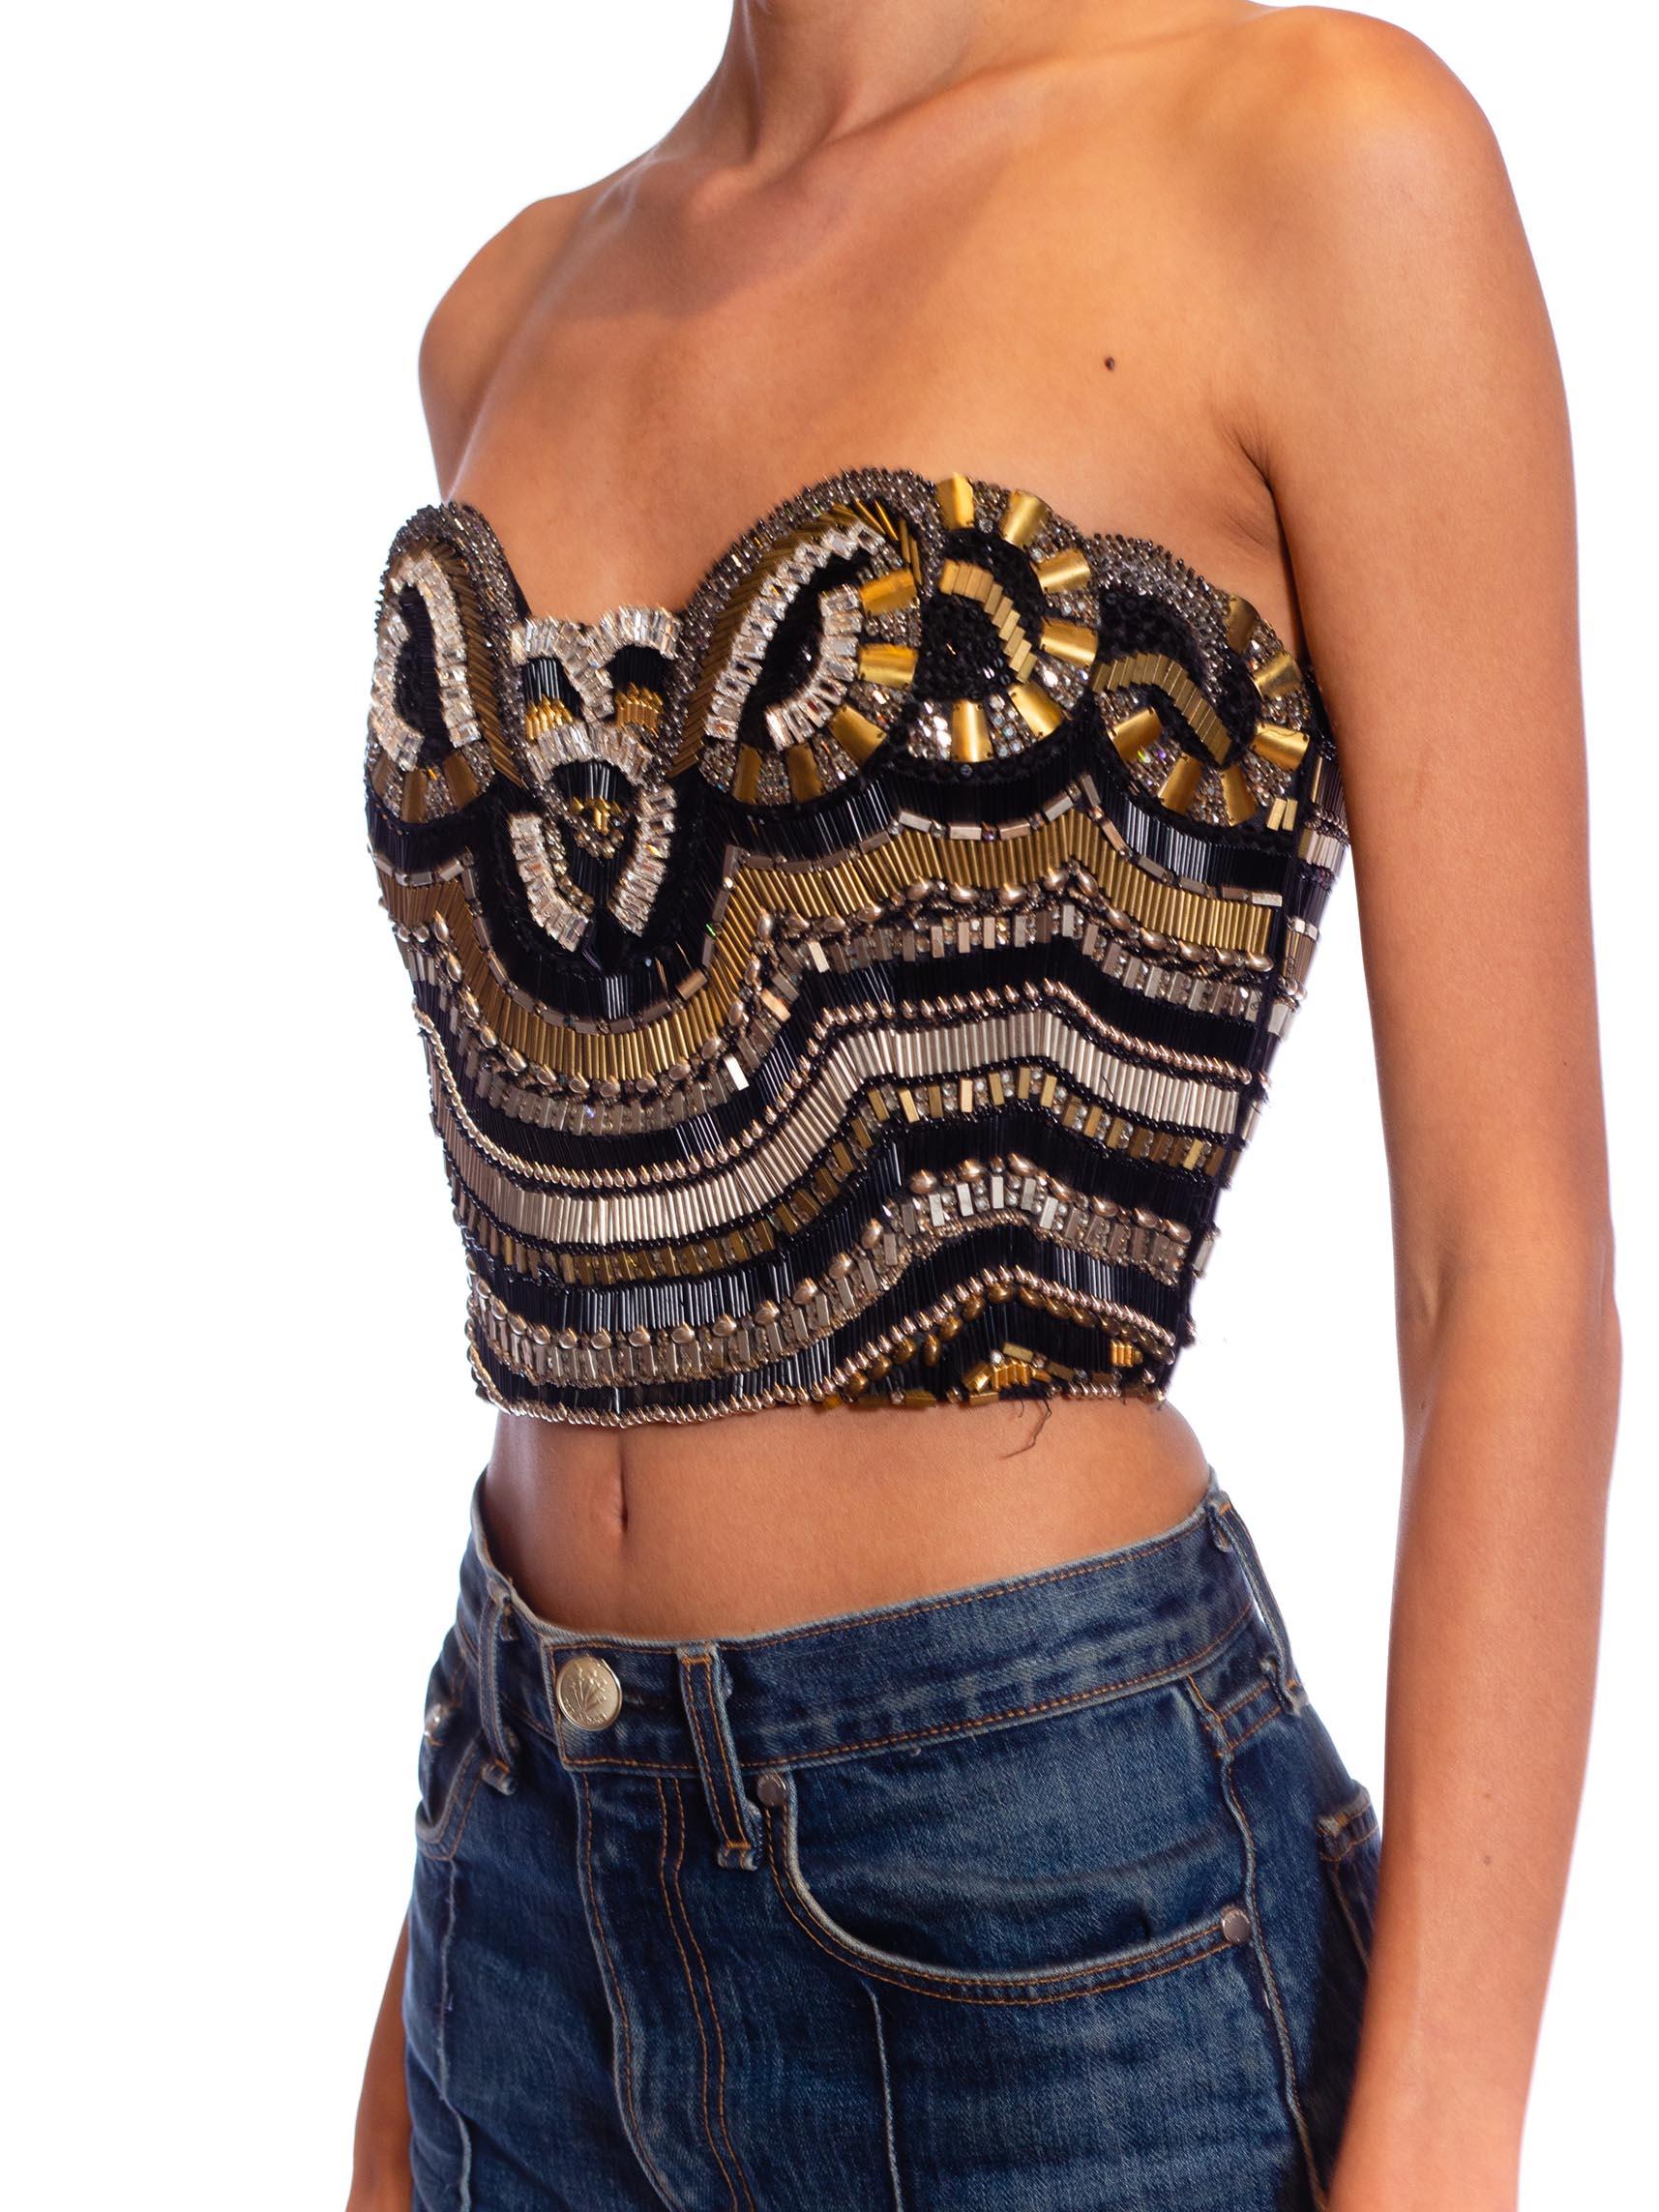 1990S GIANNI VERSACE Black, Silver & Gold Beaded Silk Strapless Bustier For Sale 3